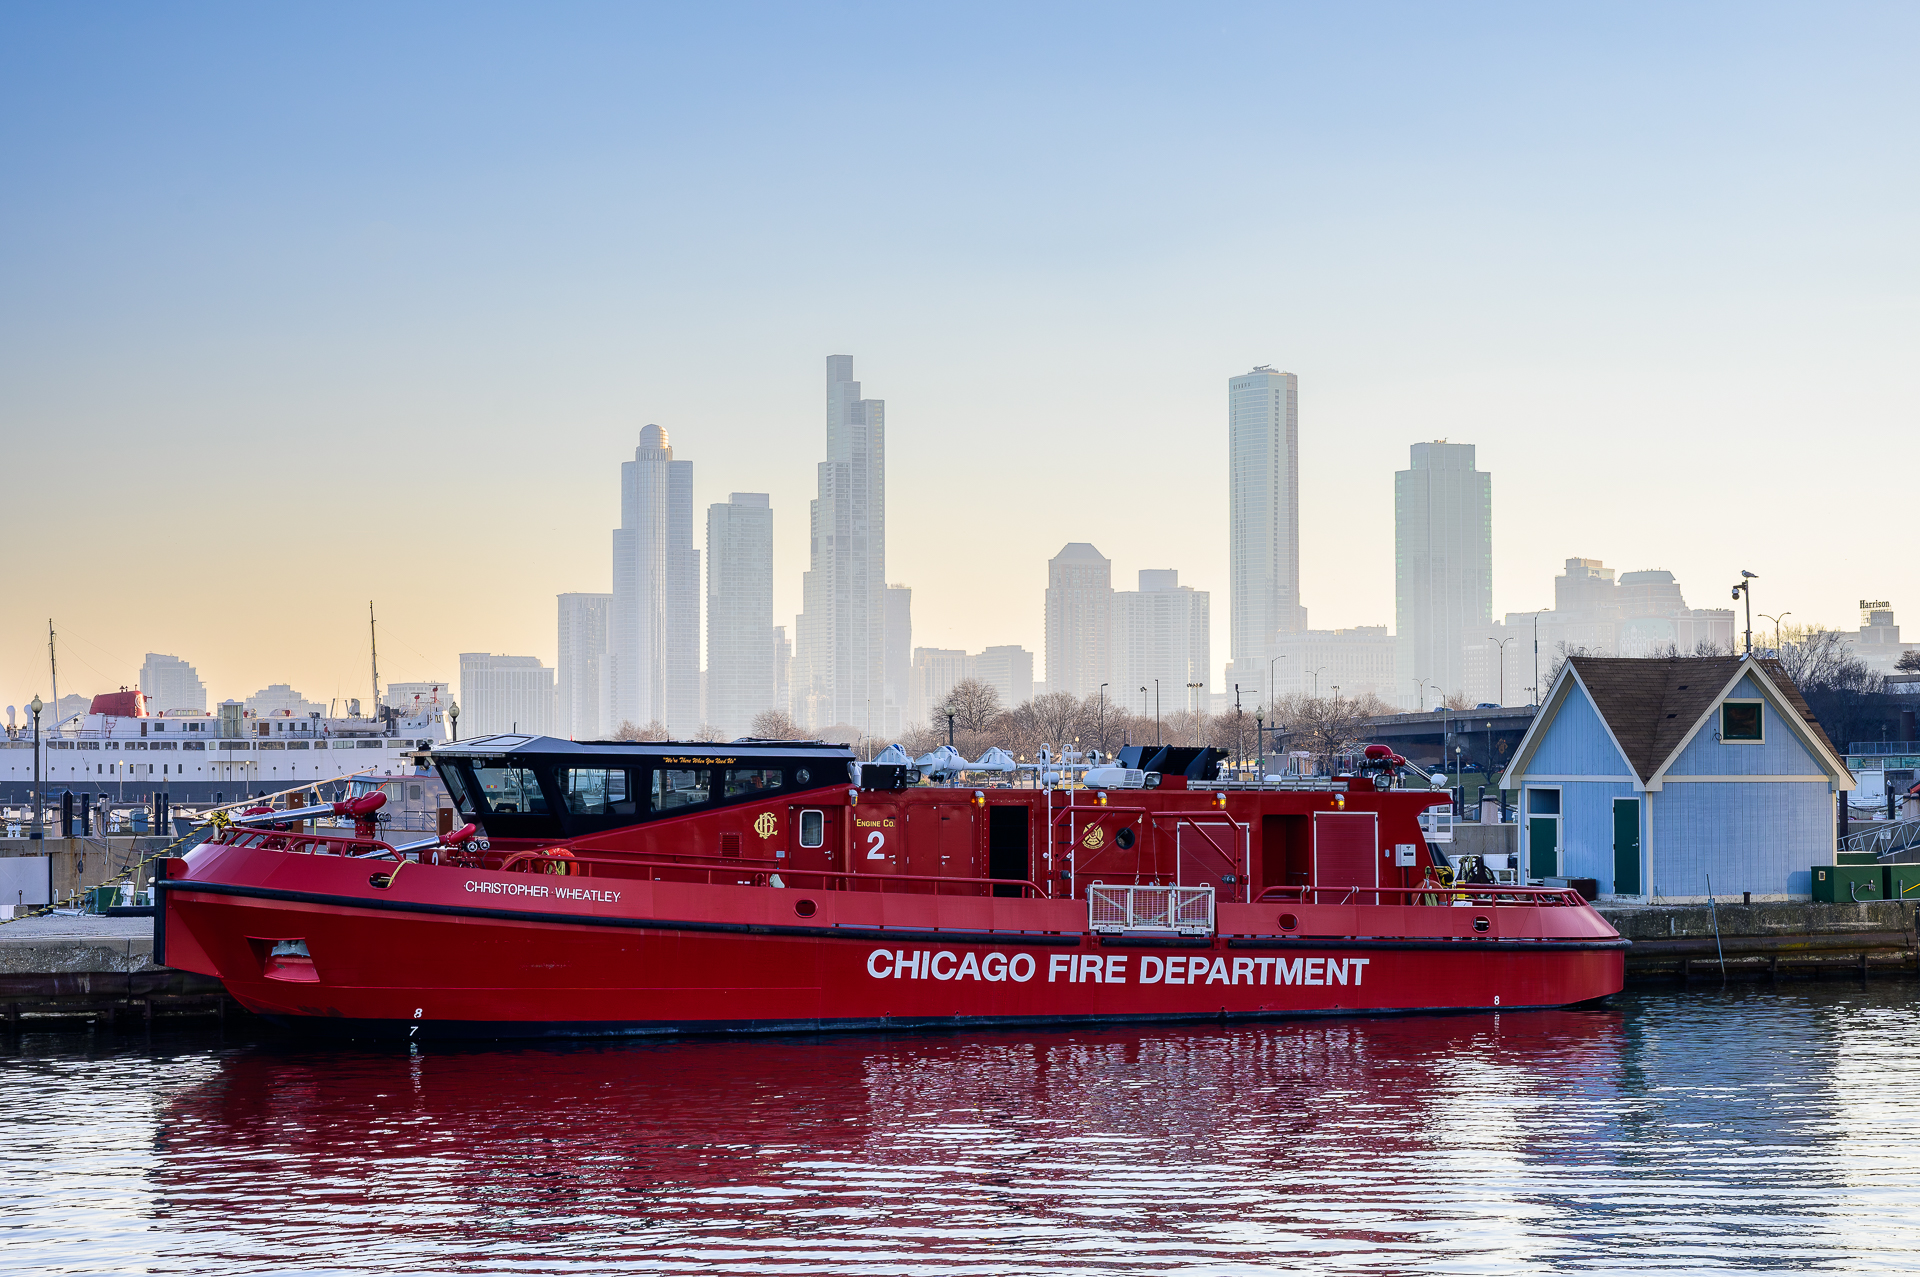 Chicago fire department boat.